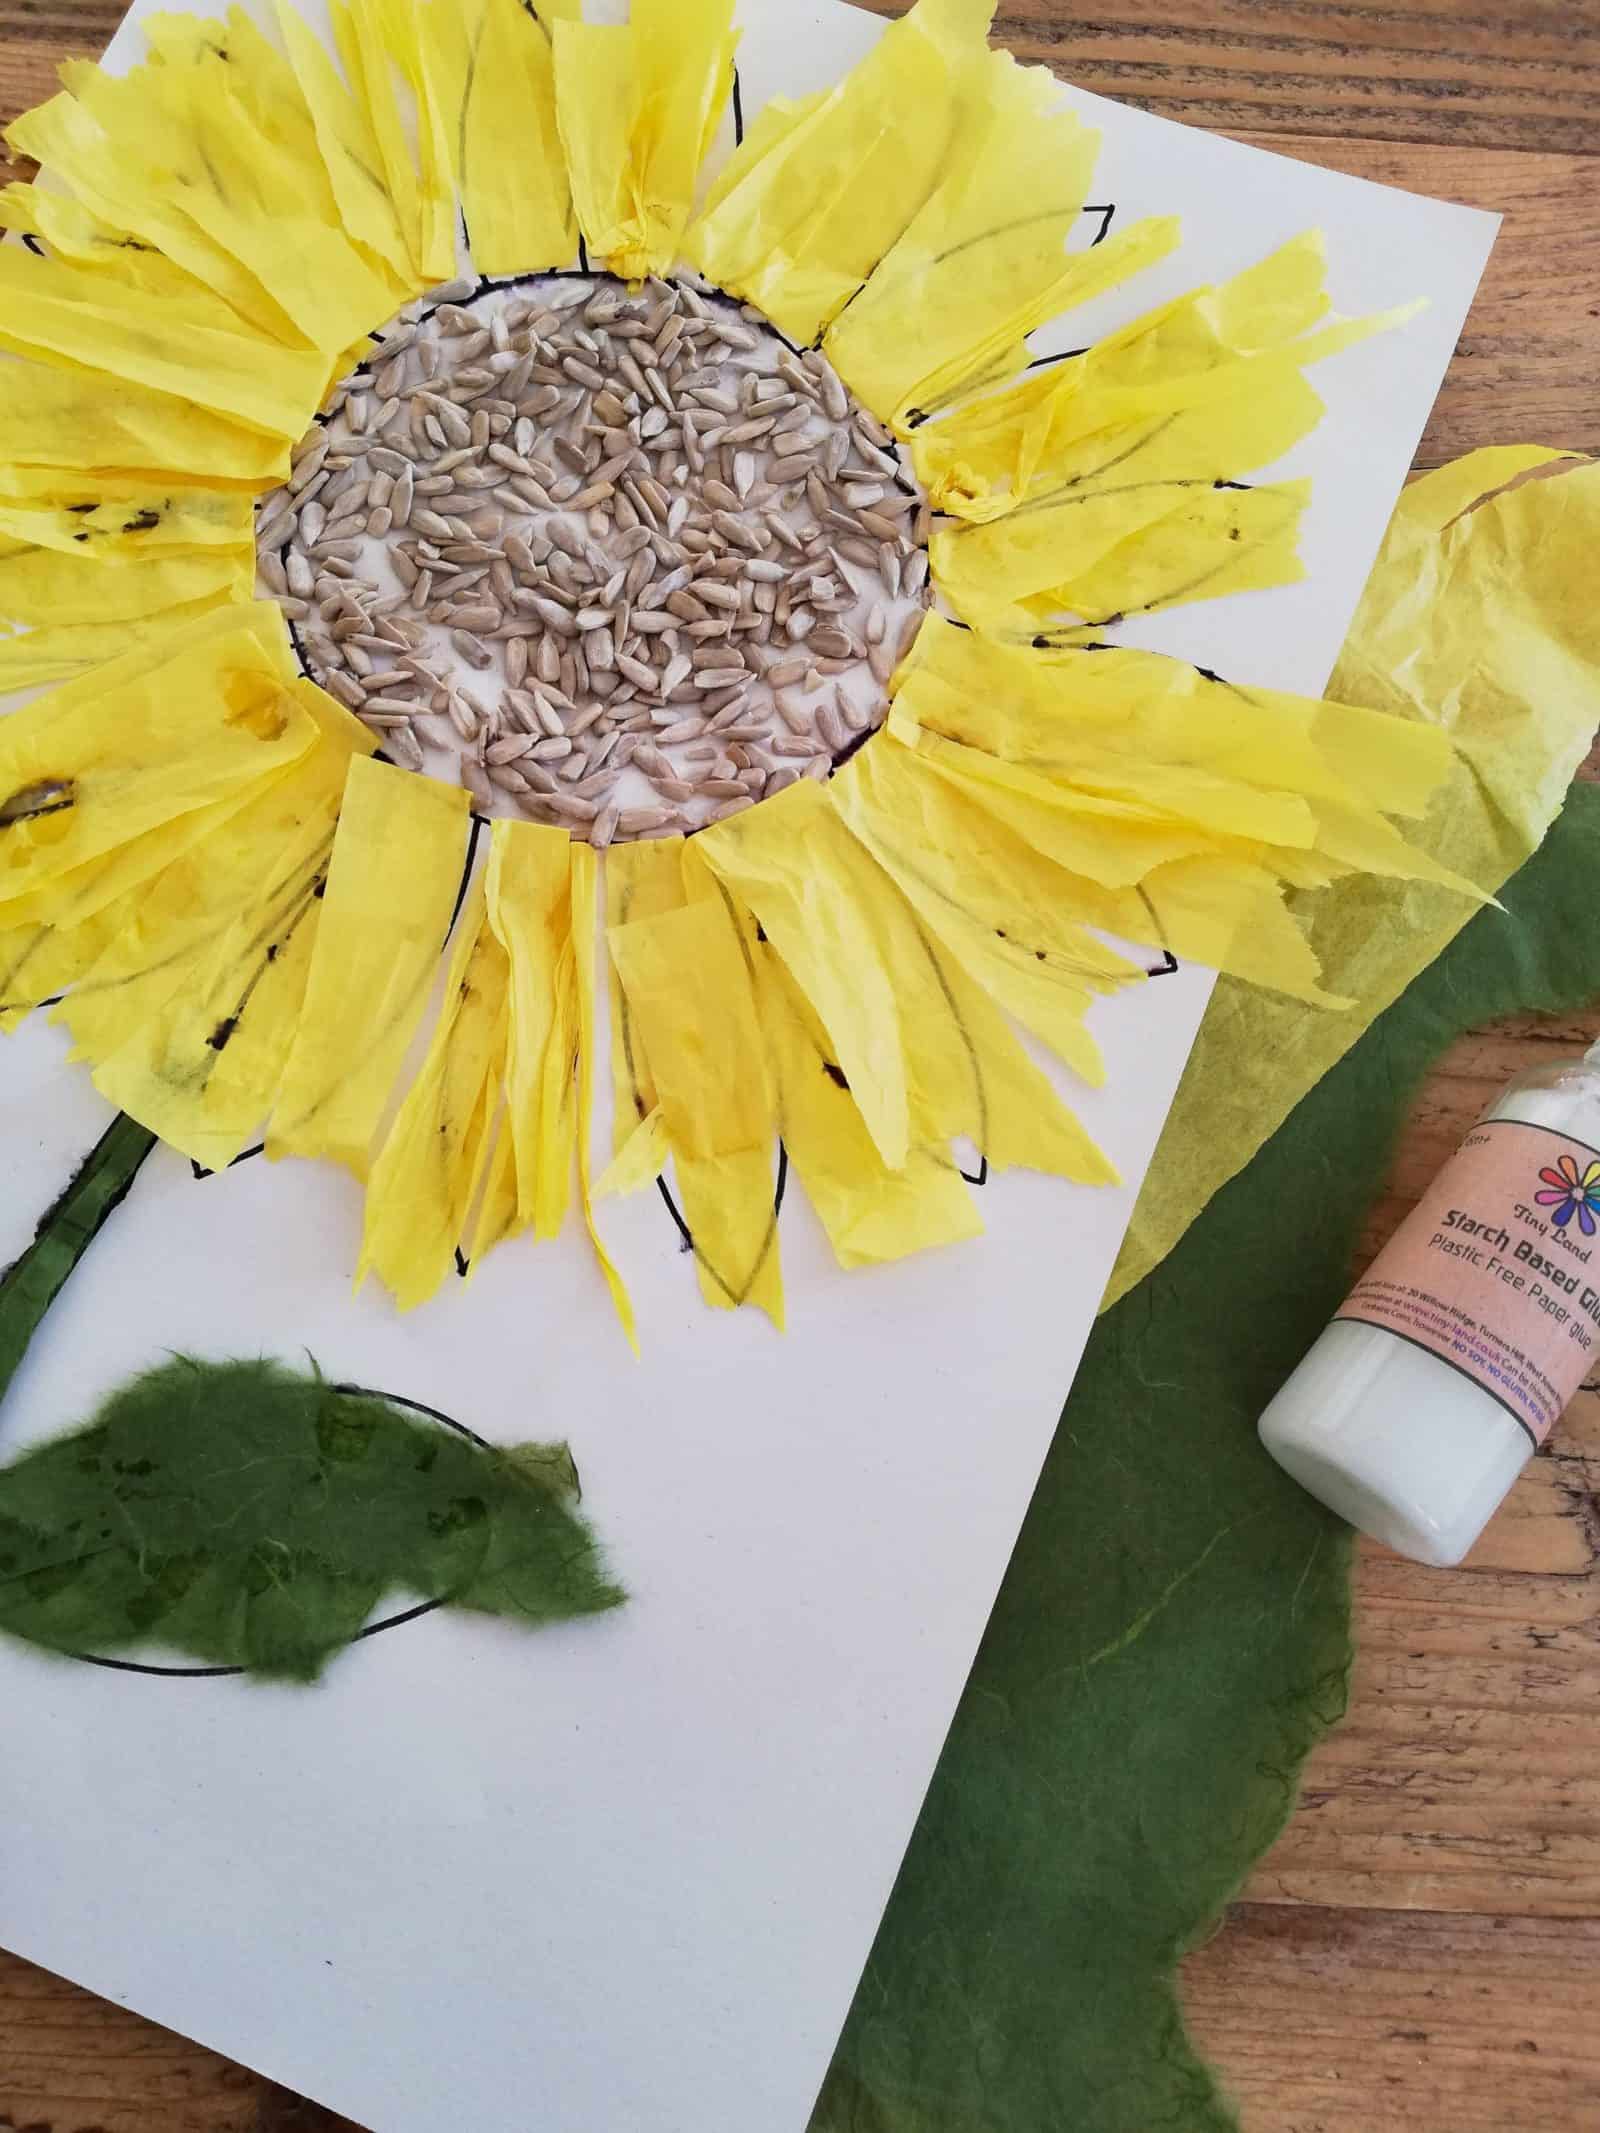 Spring Art and Craft Ideas - Sunflower - painting - collage - fine motor skills - fine motor control - creative play - messy play - waldorf inspired - learning through play - spring play - toddler ideas - get crafty - craft therapy